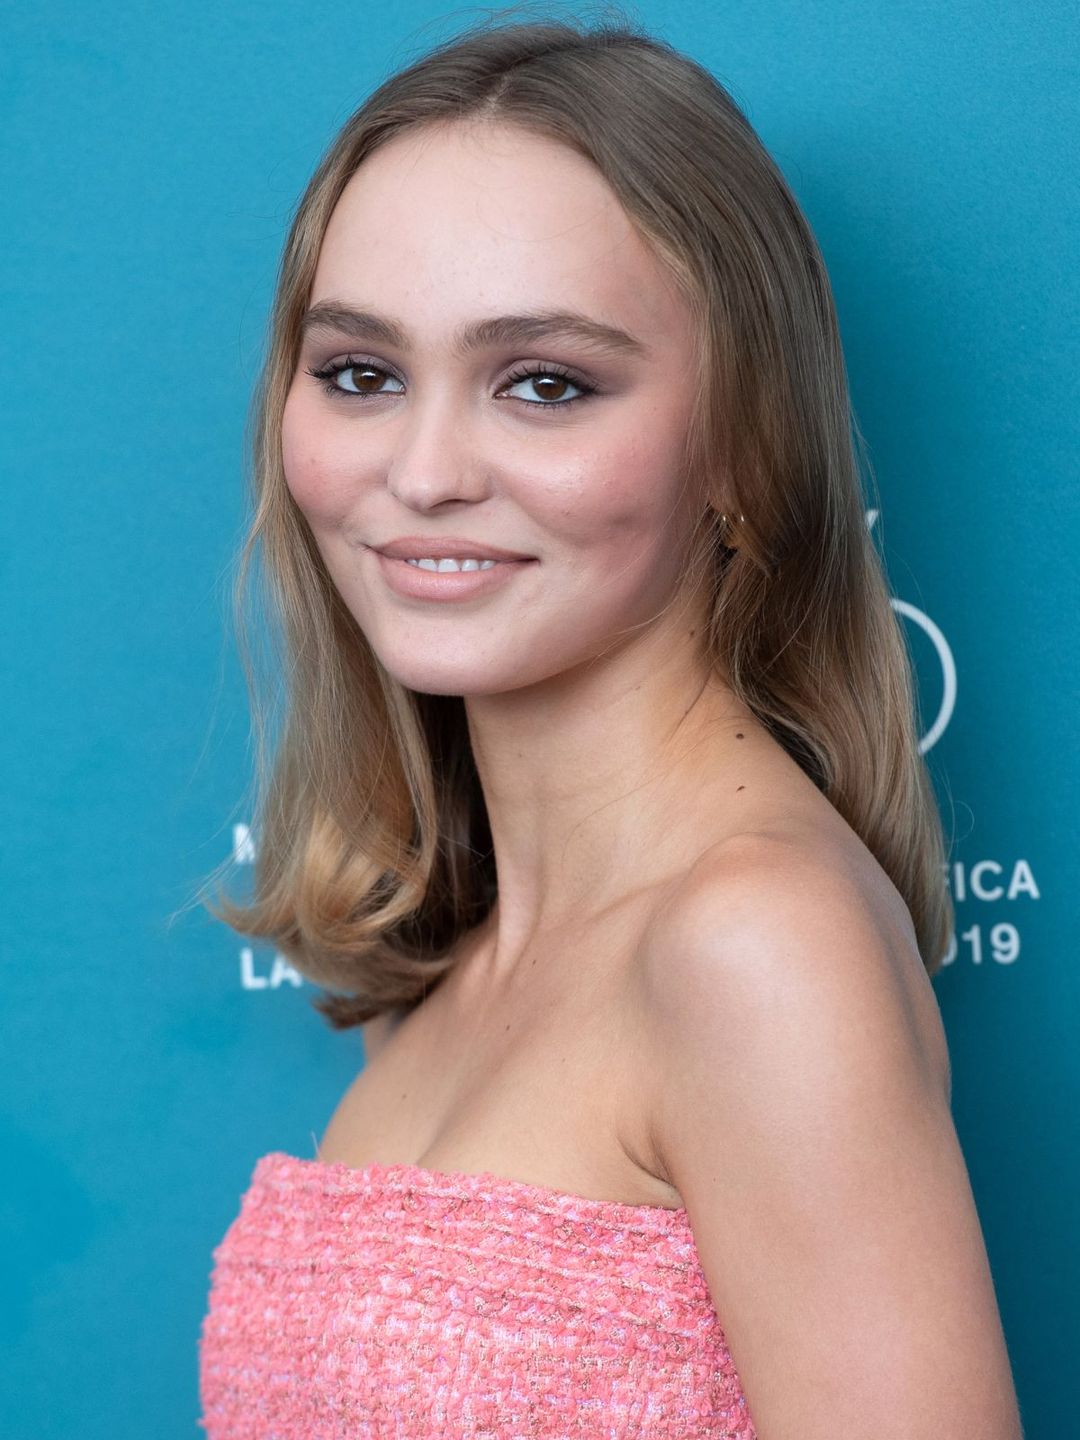 Lily-Rose Melody Depp who is her mother